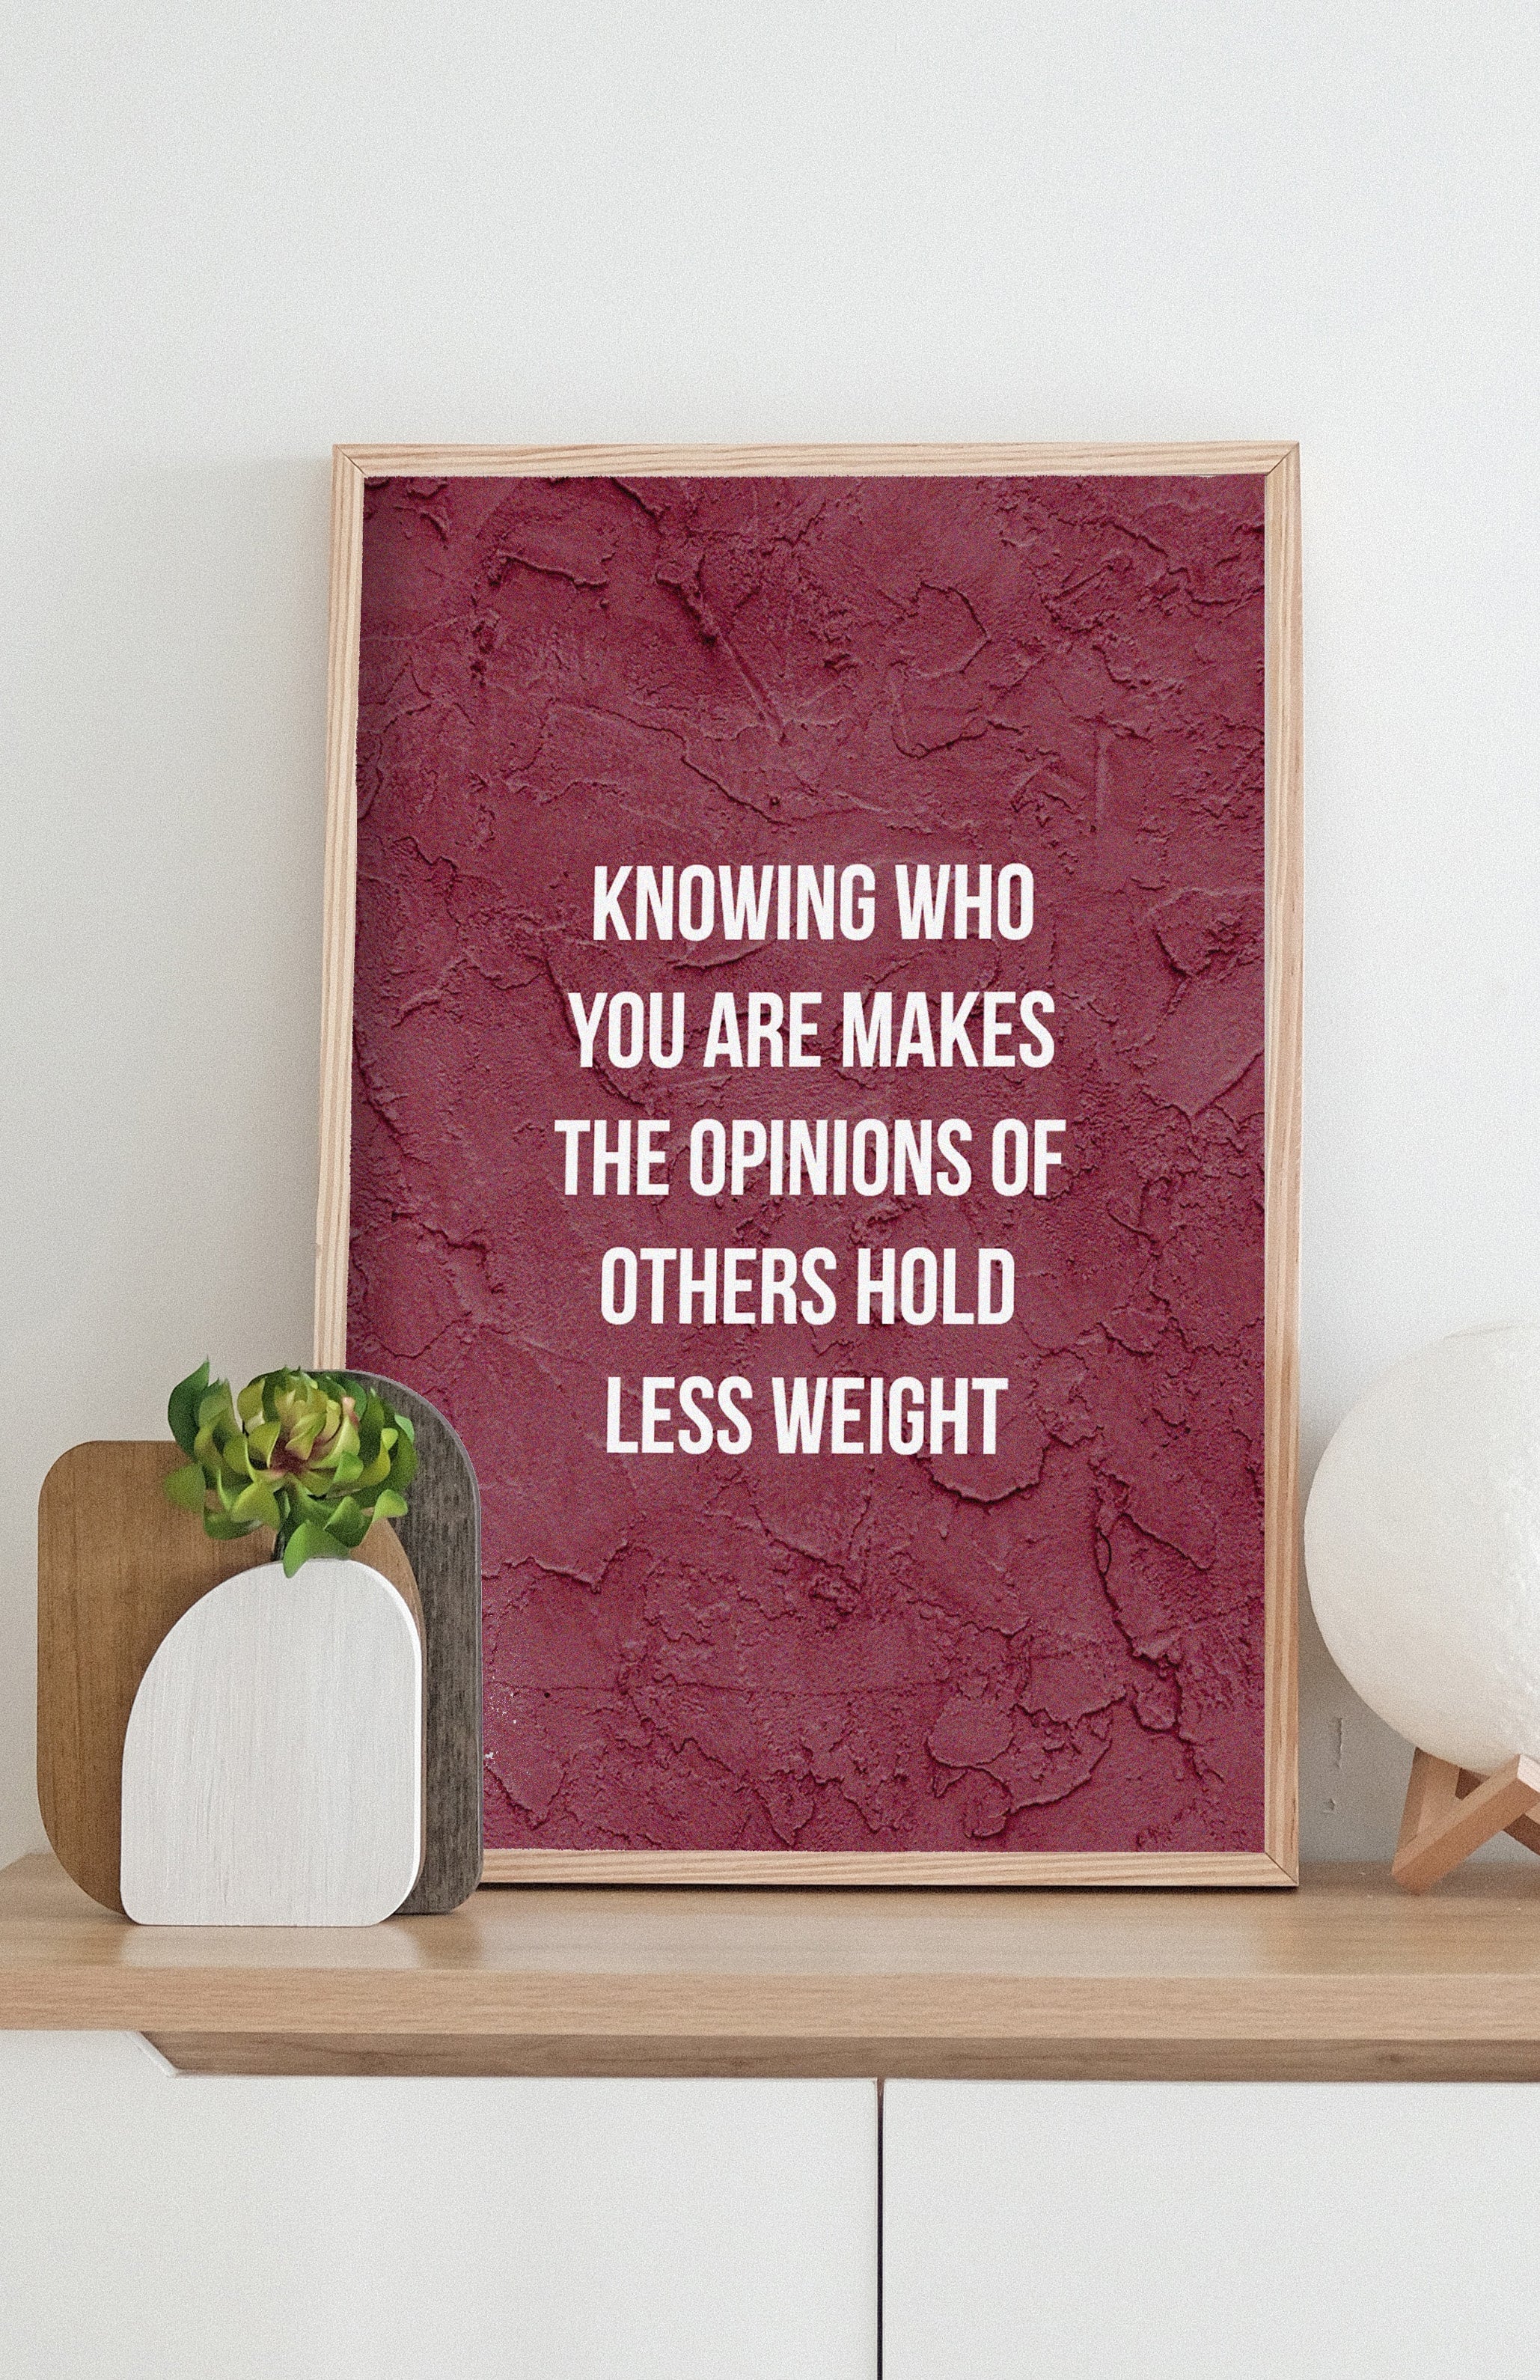 redbaysand womens Knowing Who You are Makes the Opinions of Others Hold Less Weight, Motivational posters, mens inspirational wall artwork and empowering poster quote designs for office, home gym, school, kitchen and living room.